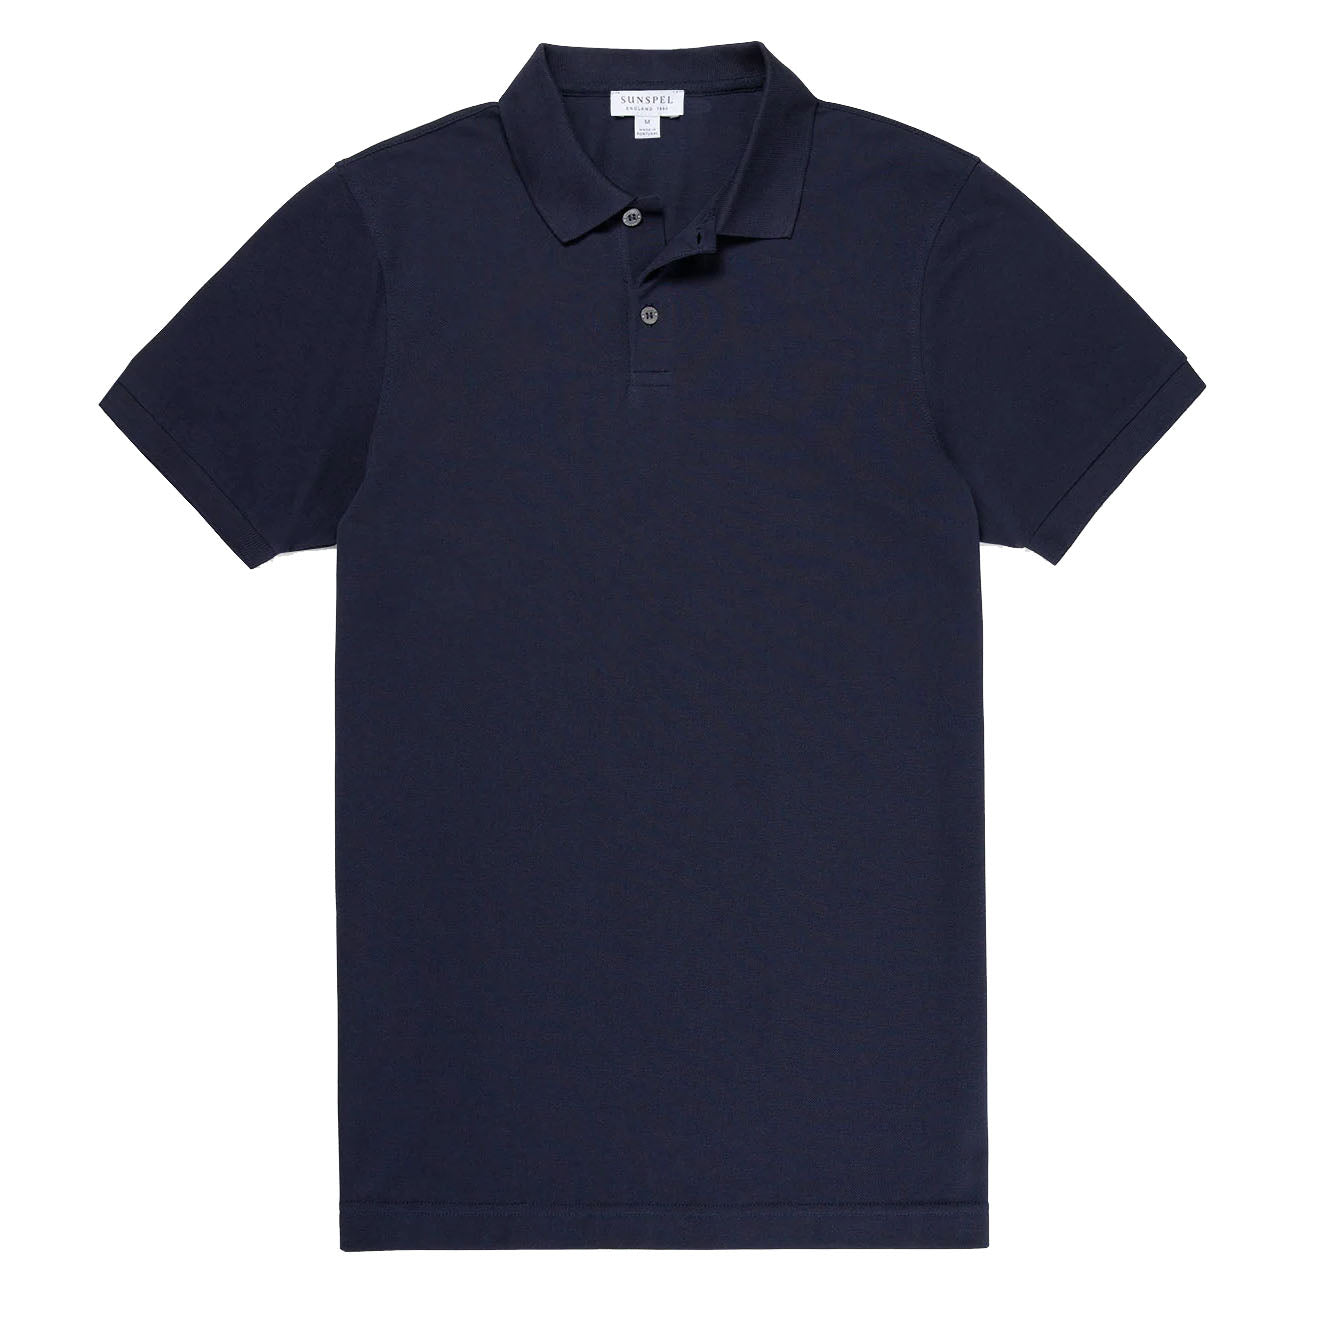 Sunspel Pique Polo Shirt Navy | The Sporting Lodge